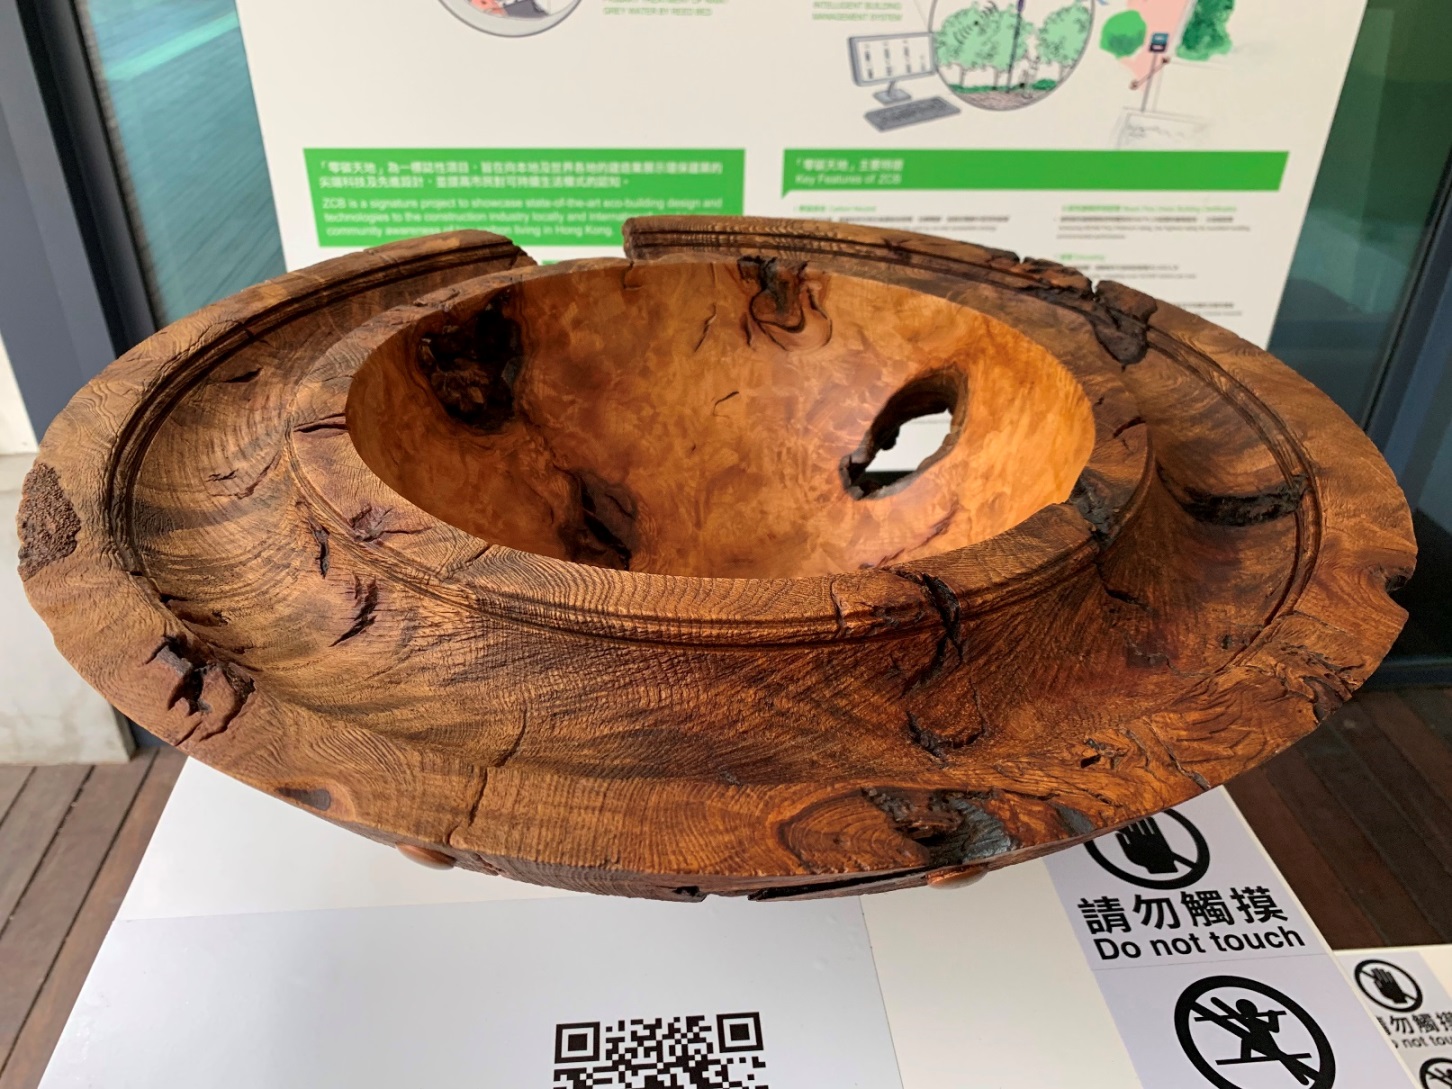 【Salvaged Bowl】Old castles and armour formed the inspiration for this piece. The Irish elm was salvaged from a bonfire and left untouched under a workbench for over a year. The many holes and included bark encapsulate nature in the piece and present a fascinating contrast with the exterior pattern. by: Joe LAIRD, Wood Turner, Ireland